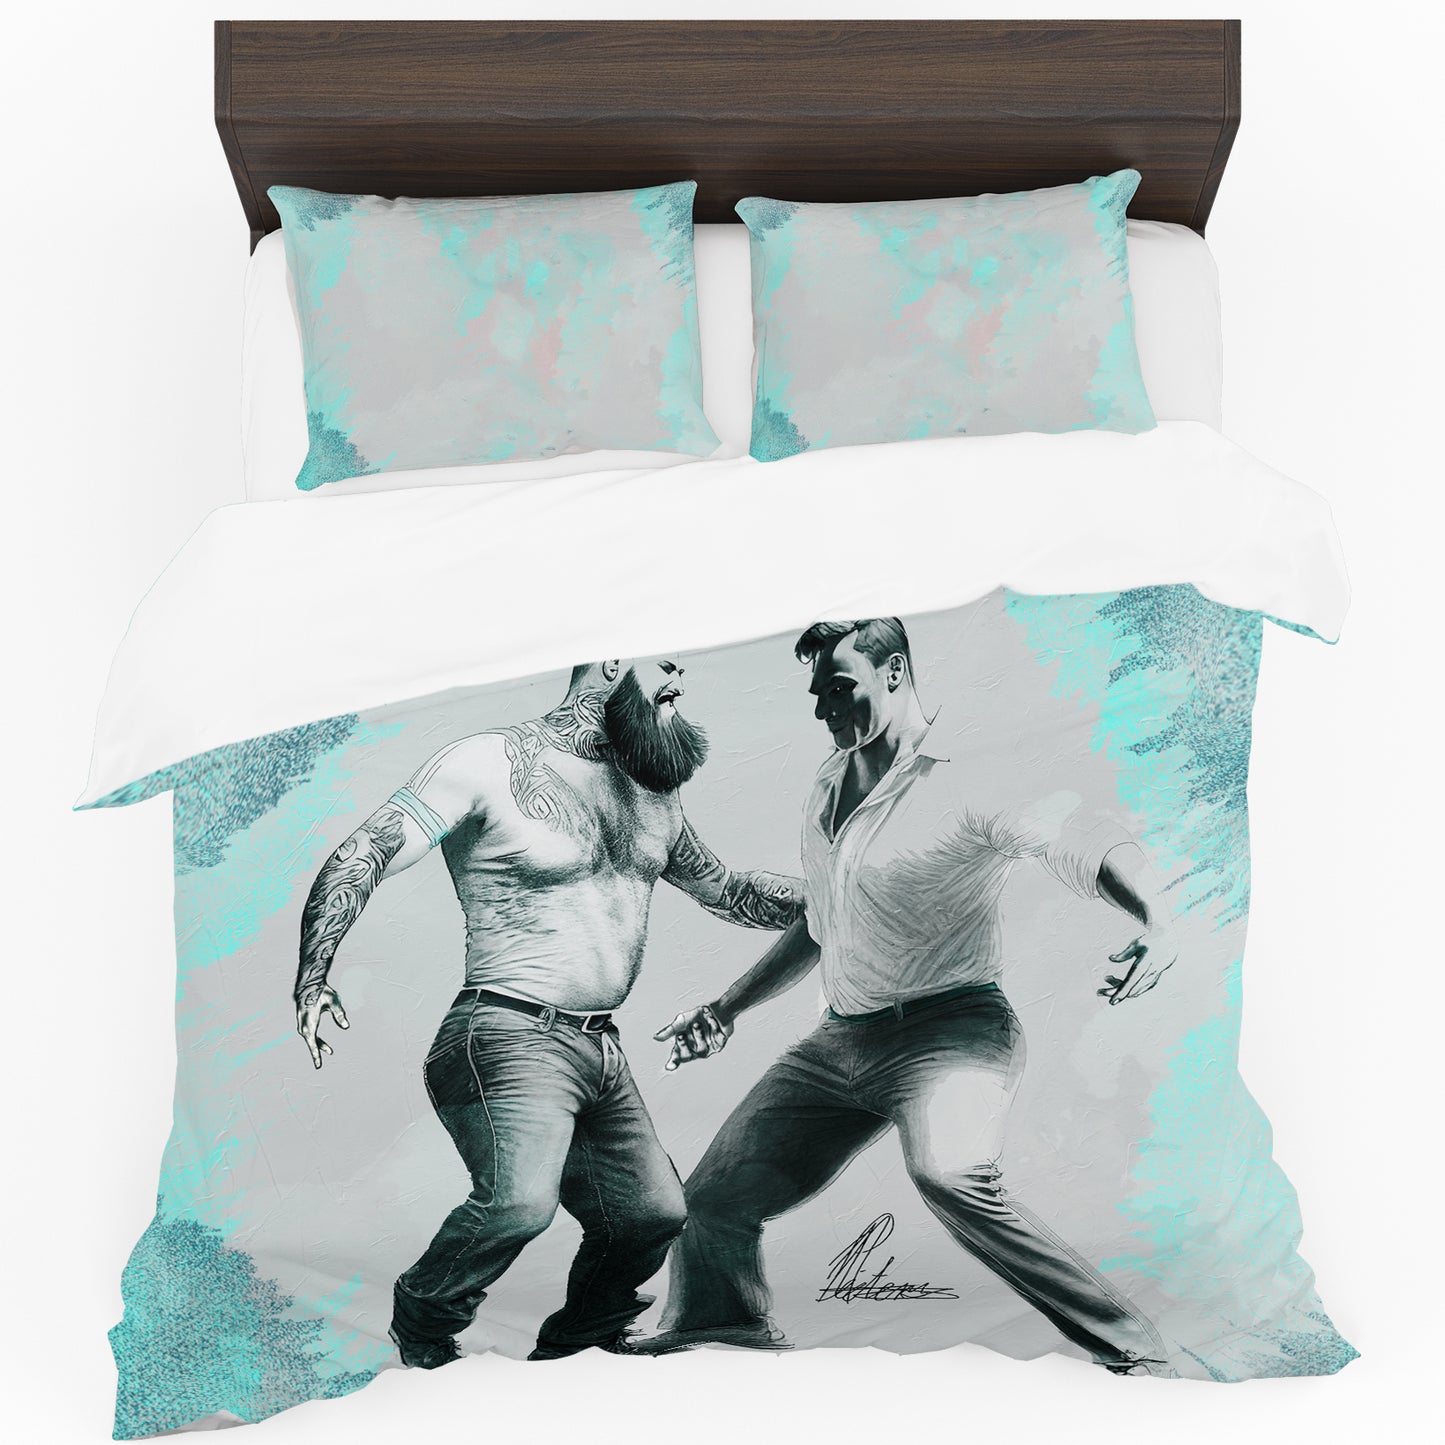 Dance with Me By Nathan Pieterse Duvet Cover Set